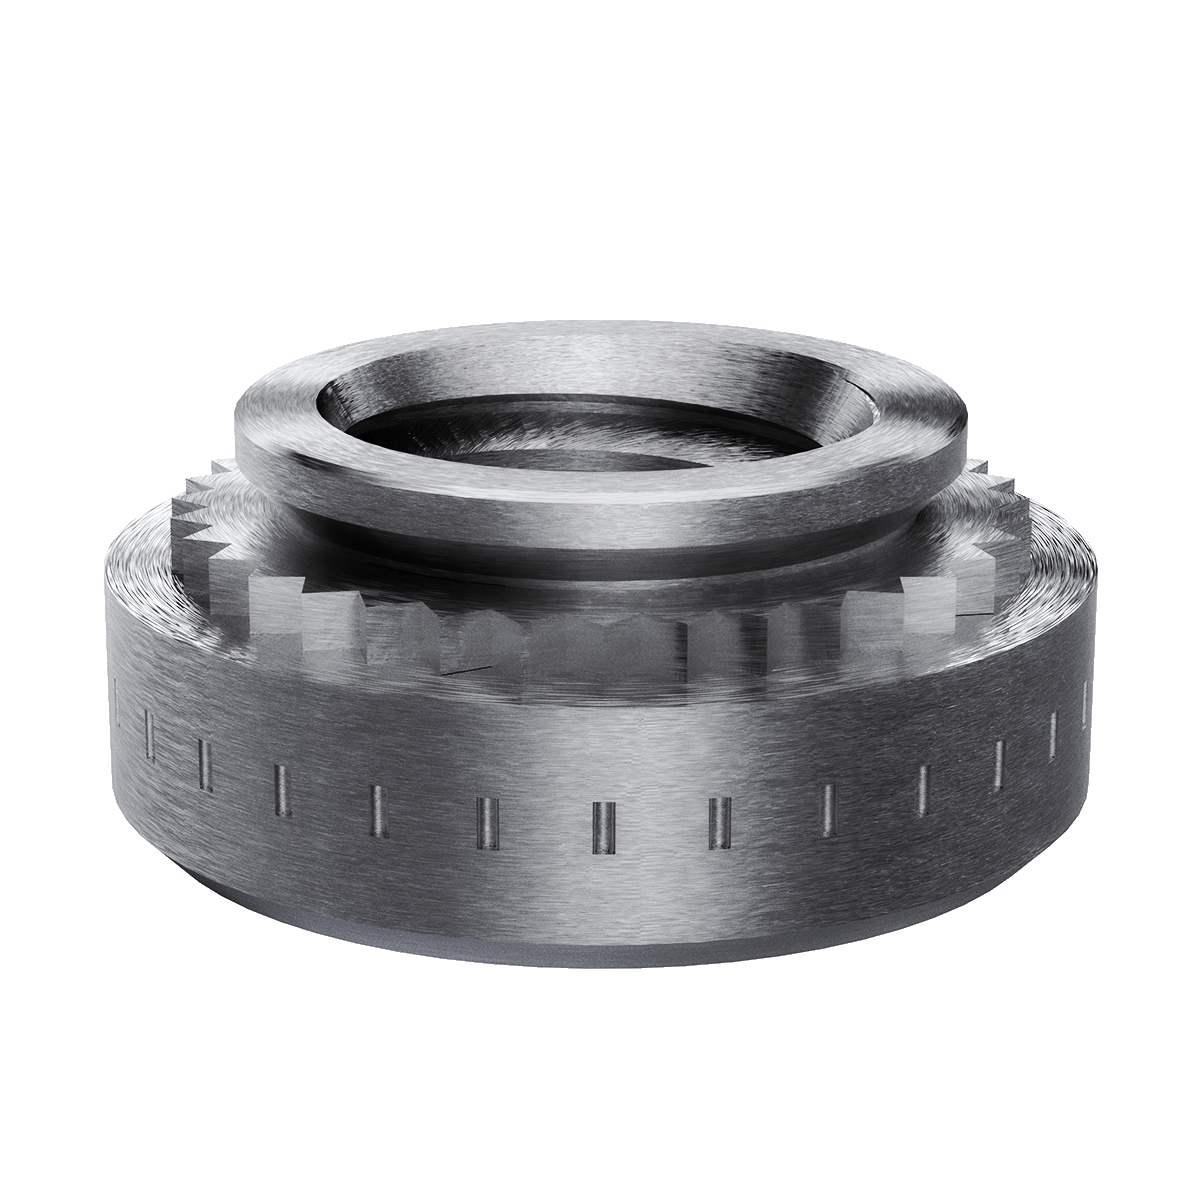 Self-Clinching Nut, For SS, 17-4 Stainless Steel, Passivated, 6-32 x 2, 100 Pack